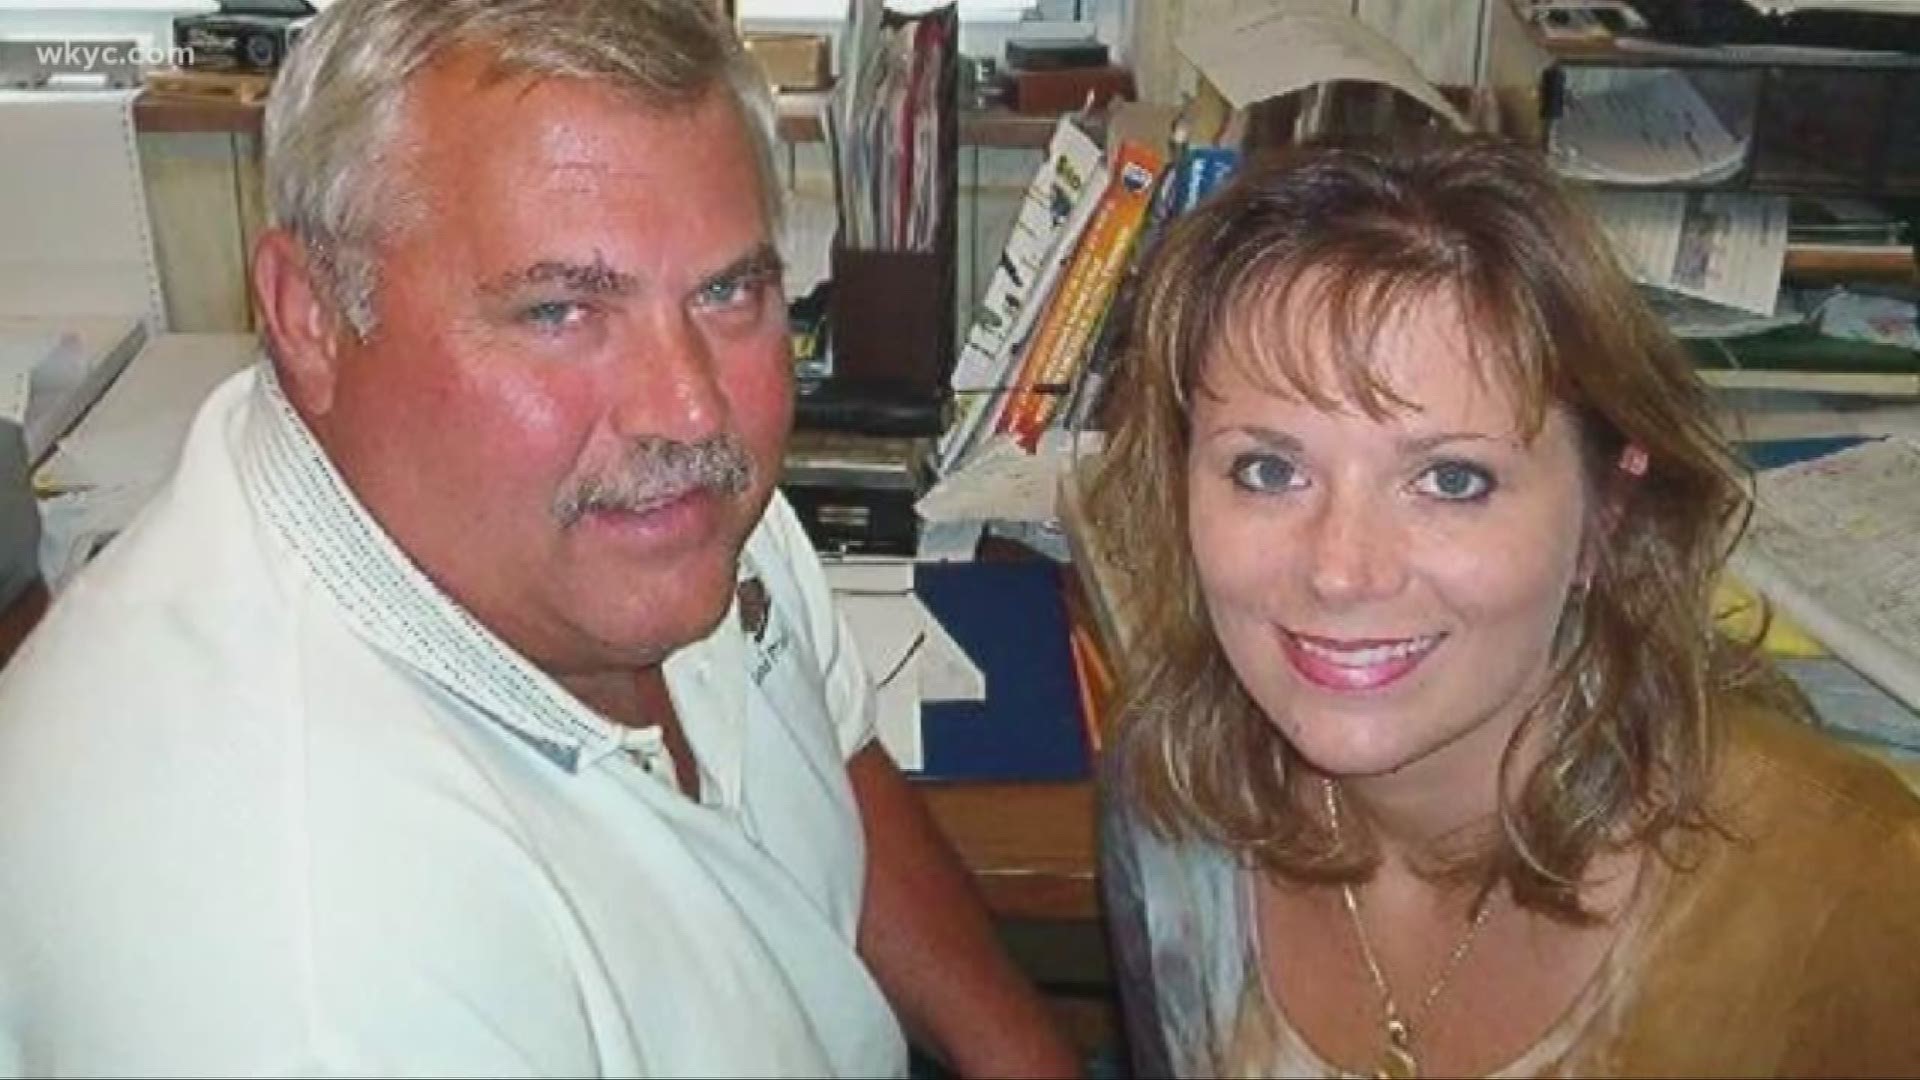 Ohio woman lost father to distracted driving accident